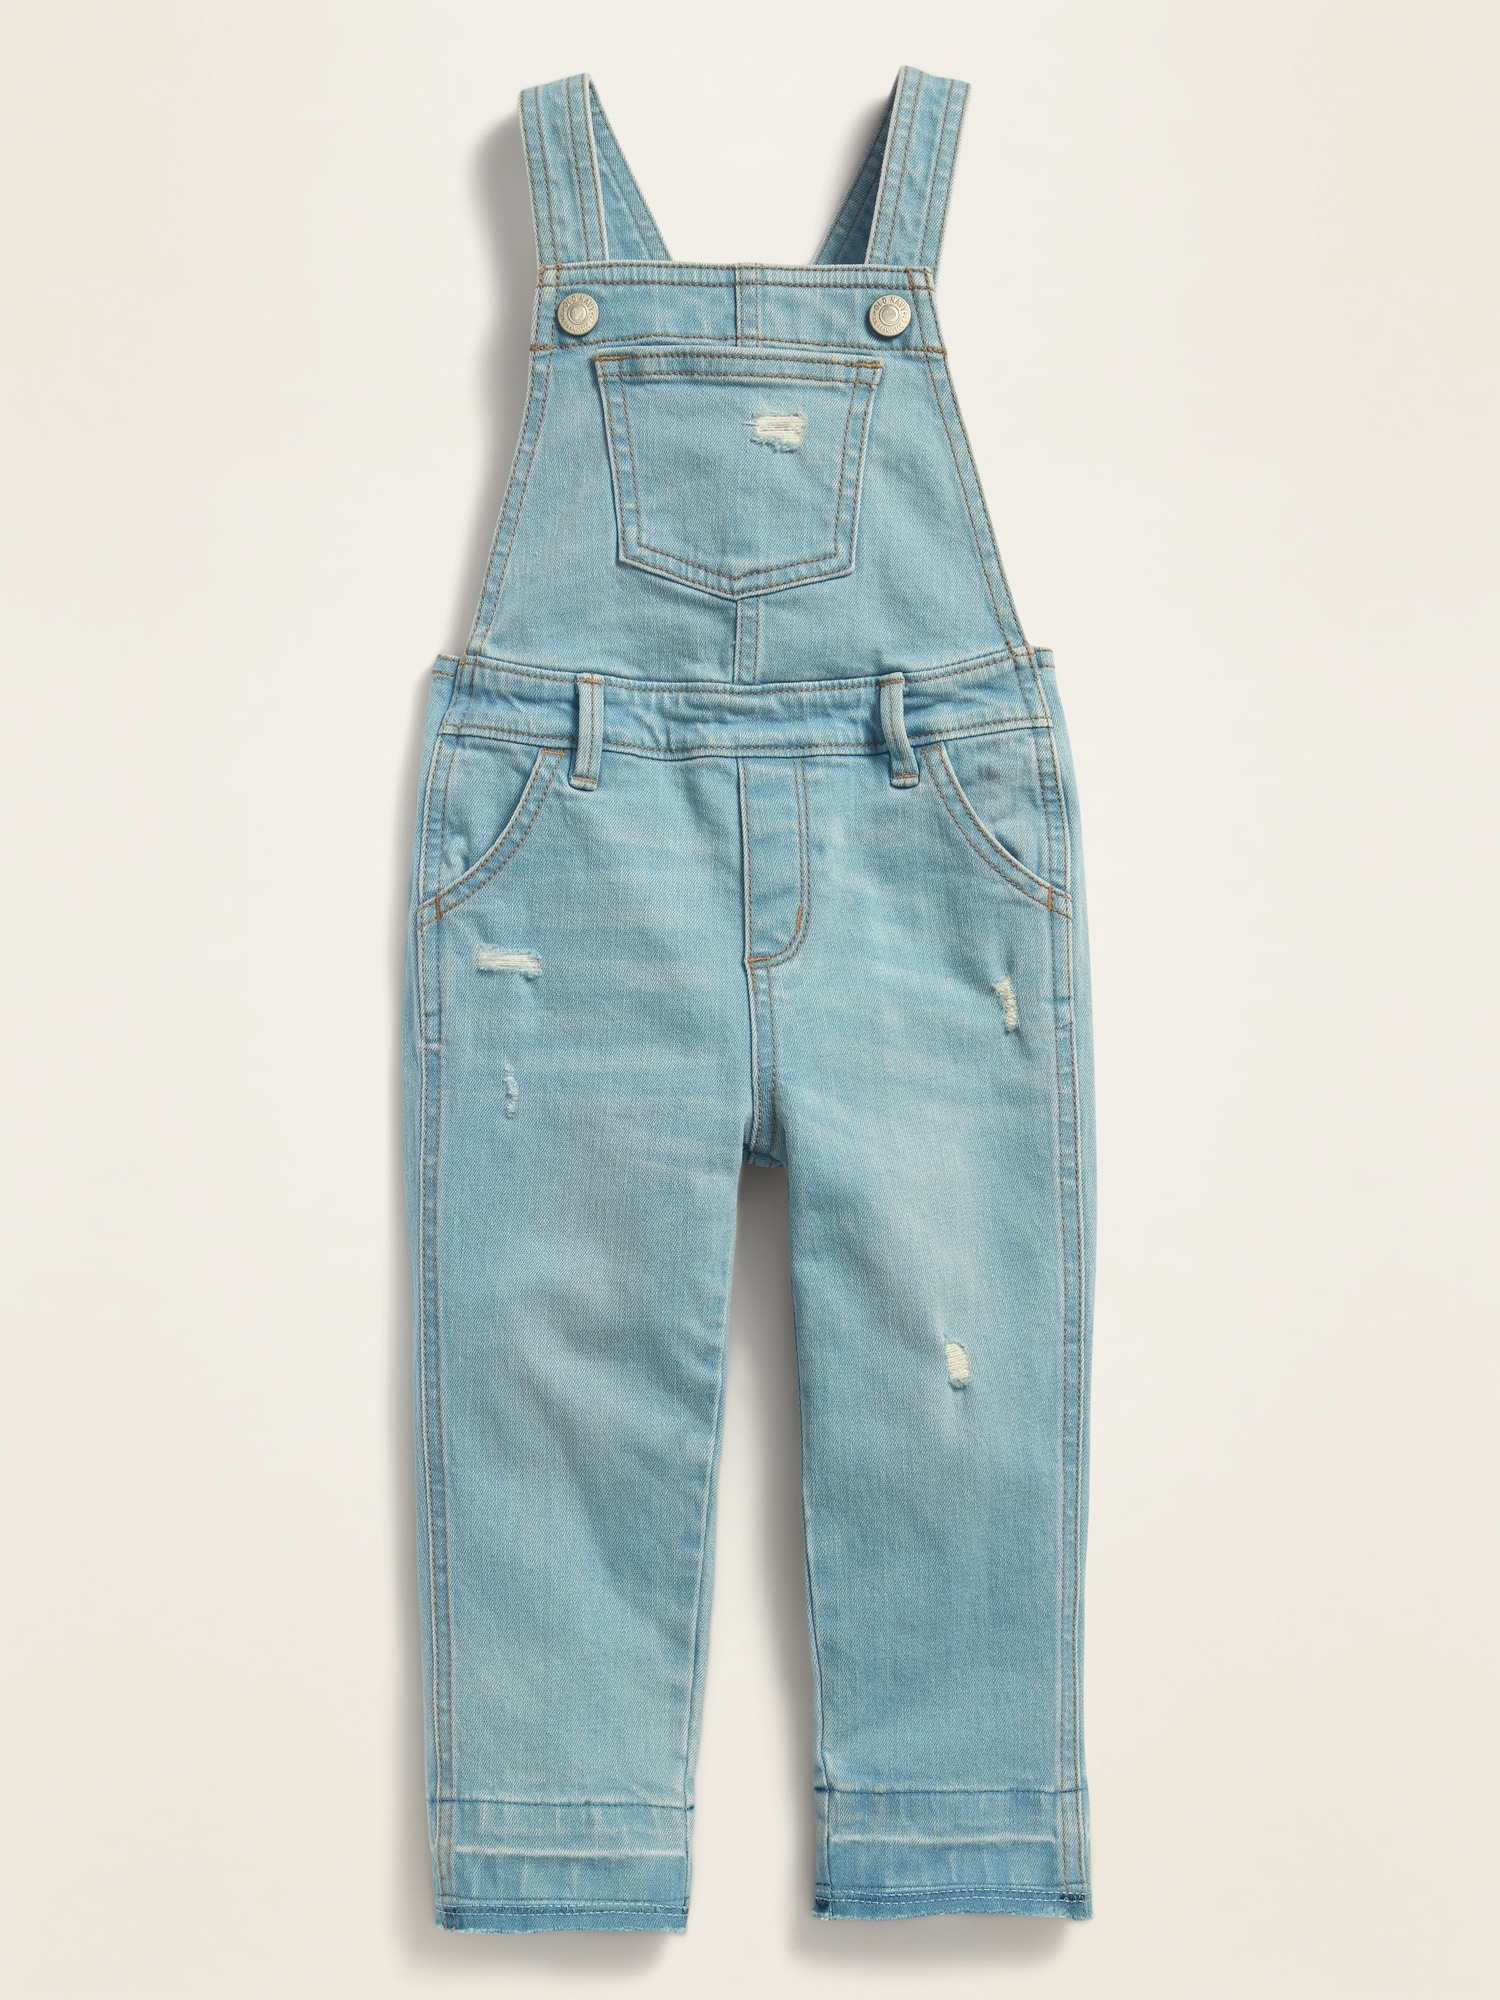 distressed jean overalls